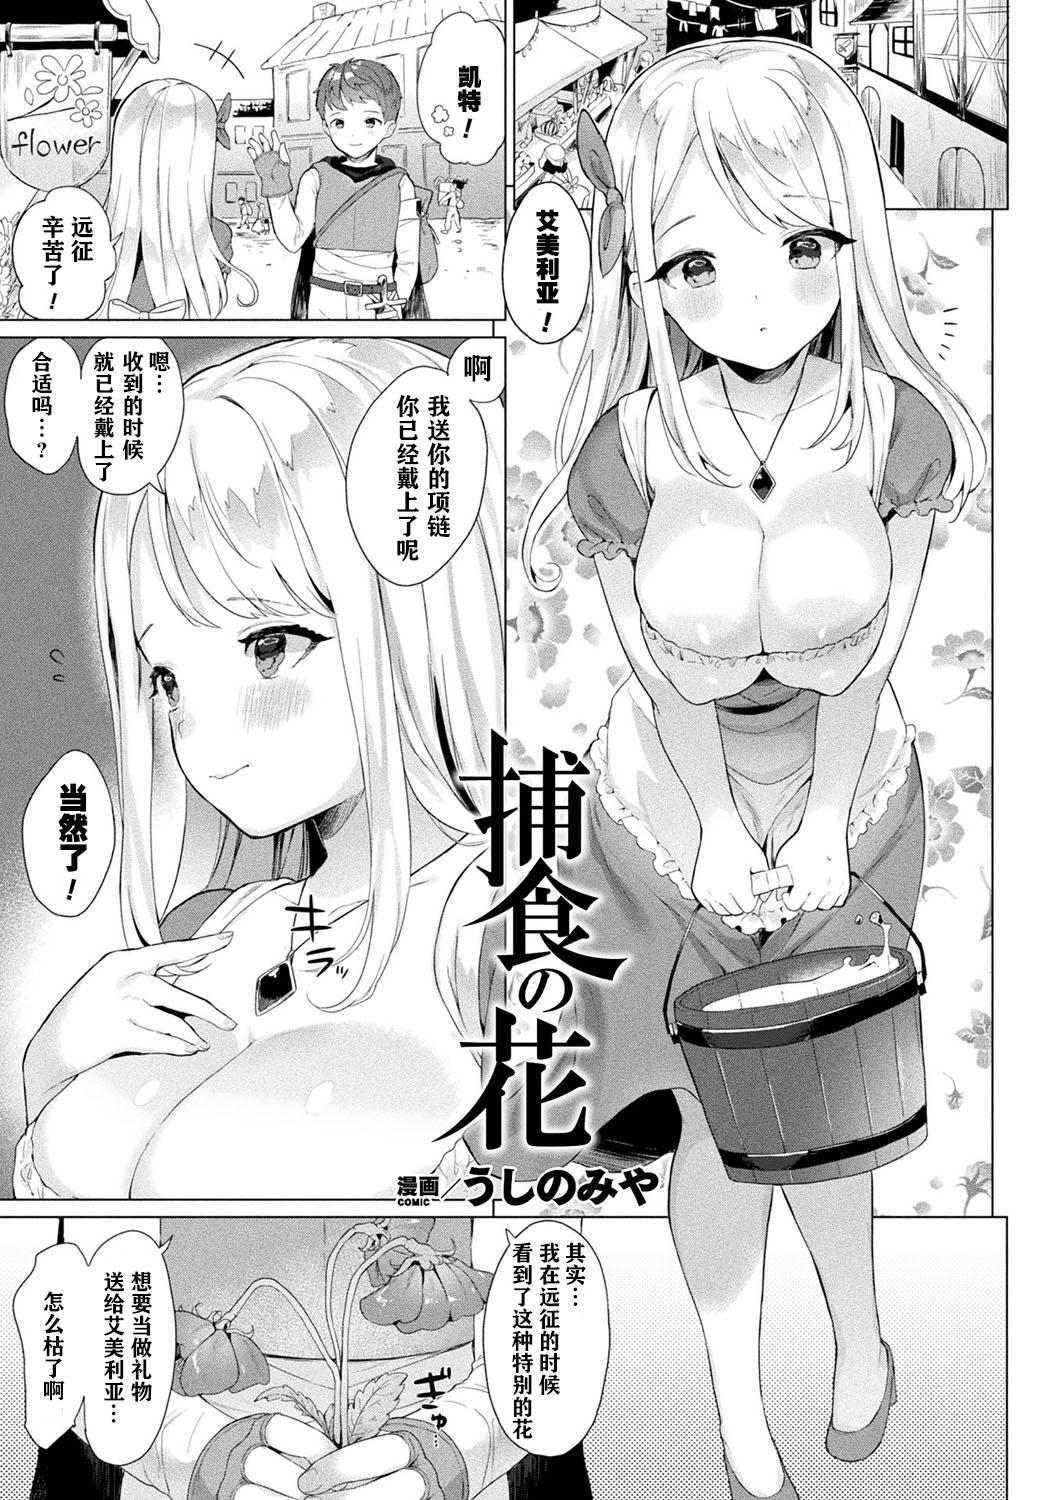 COMIC Unreal Transforming Into Another Person and Spoofing Temptation Vol.1 [Digital][Chinese]【不可视汉化】 13